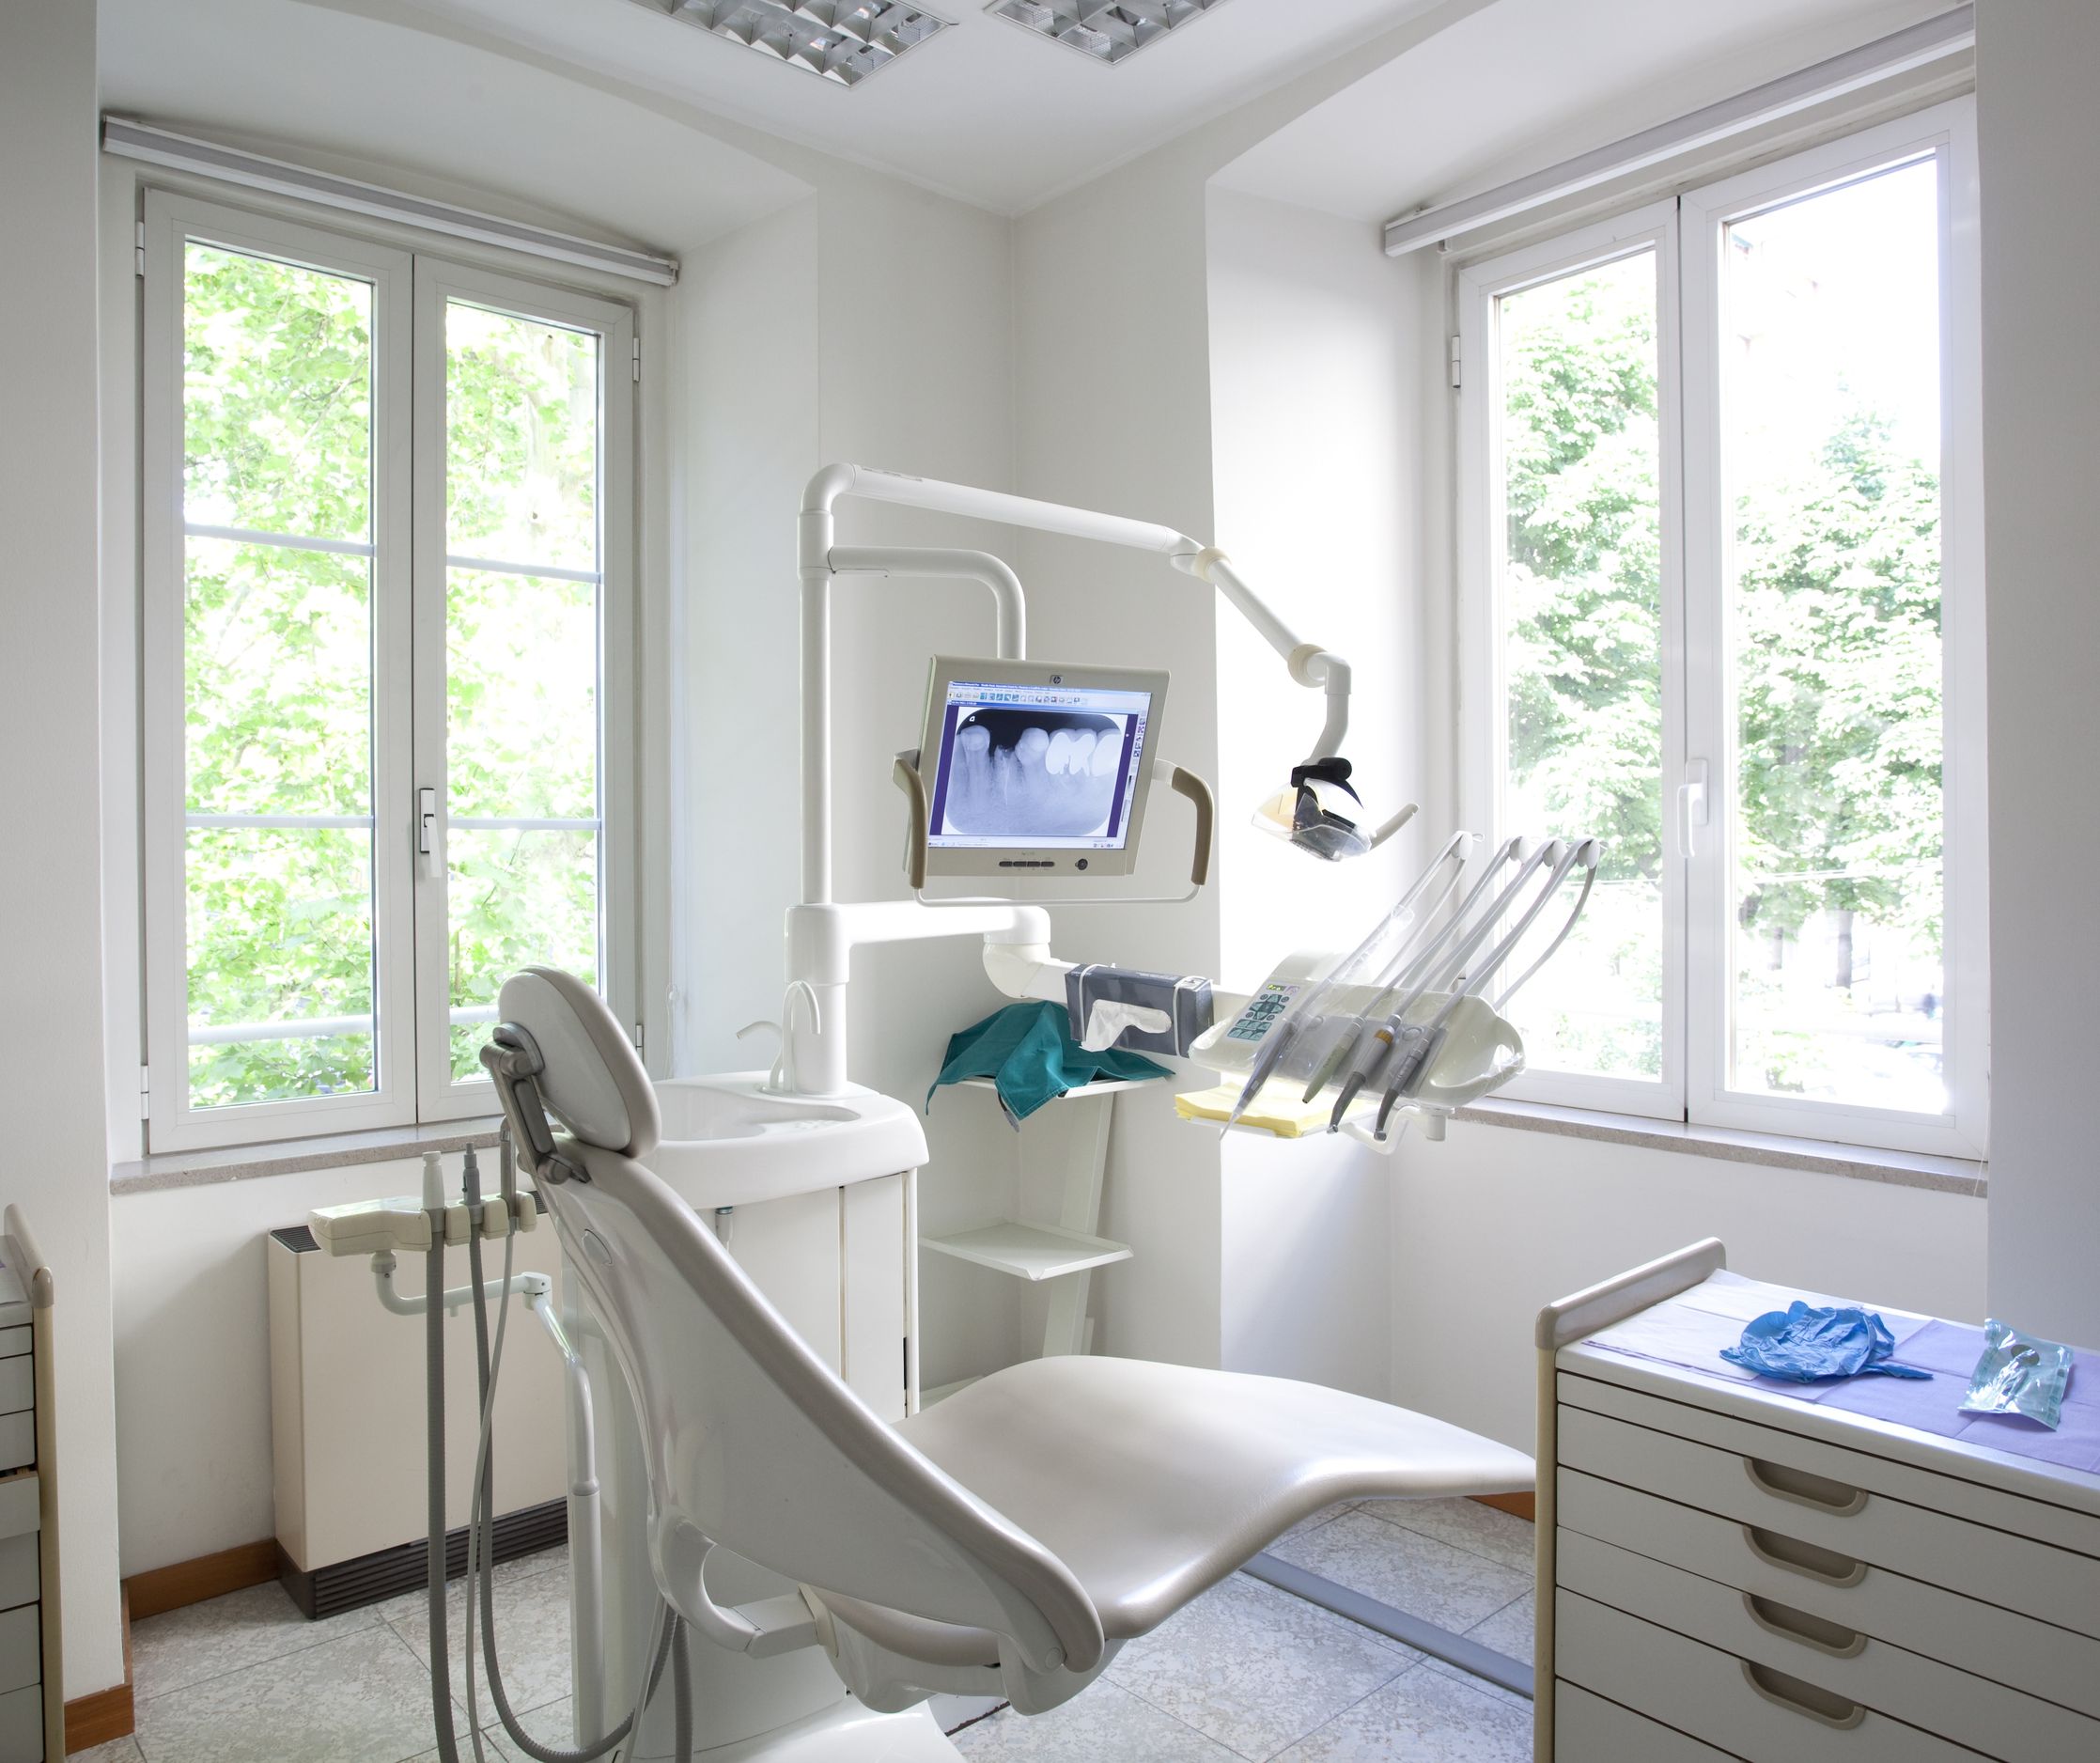 What Are the Best Dental Care Options in Edmonton, Alberta?